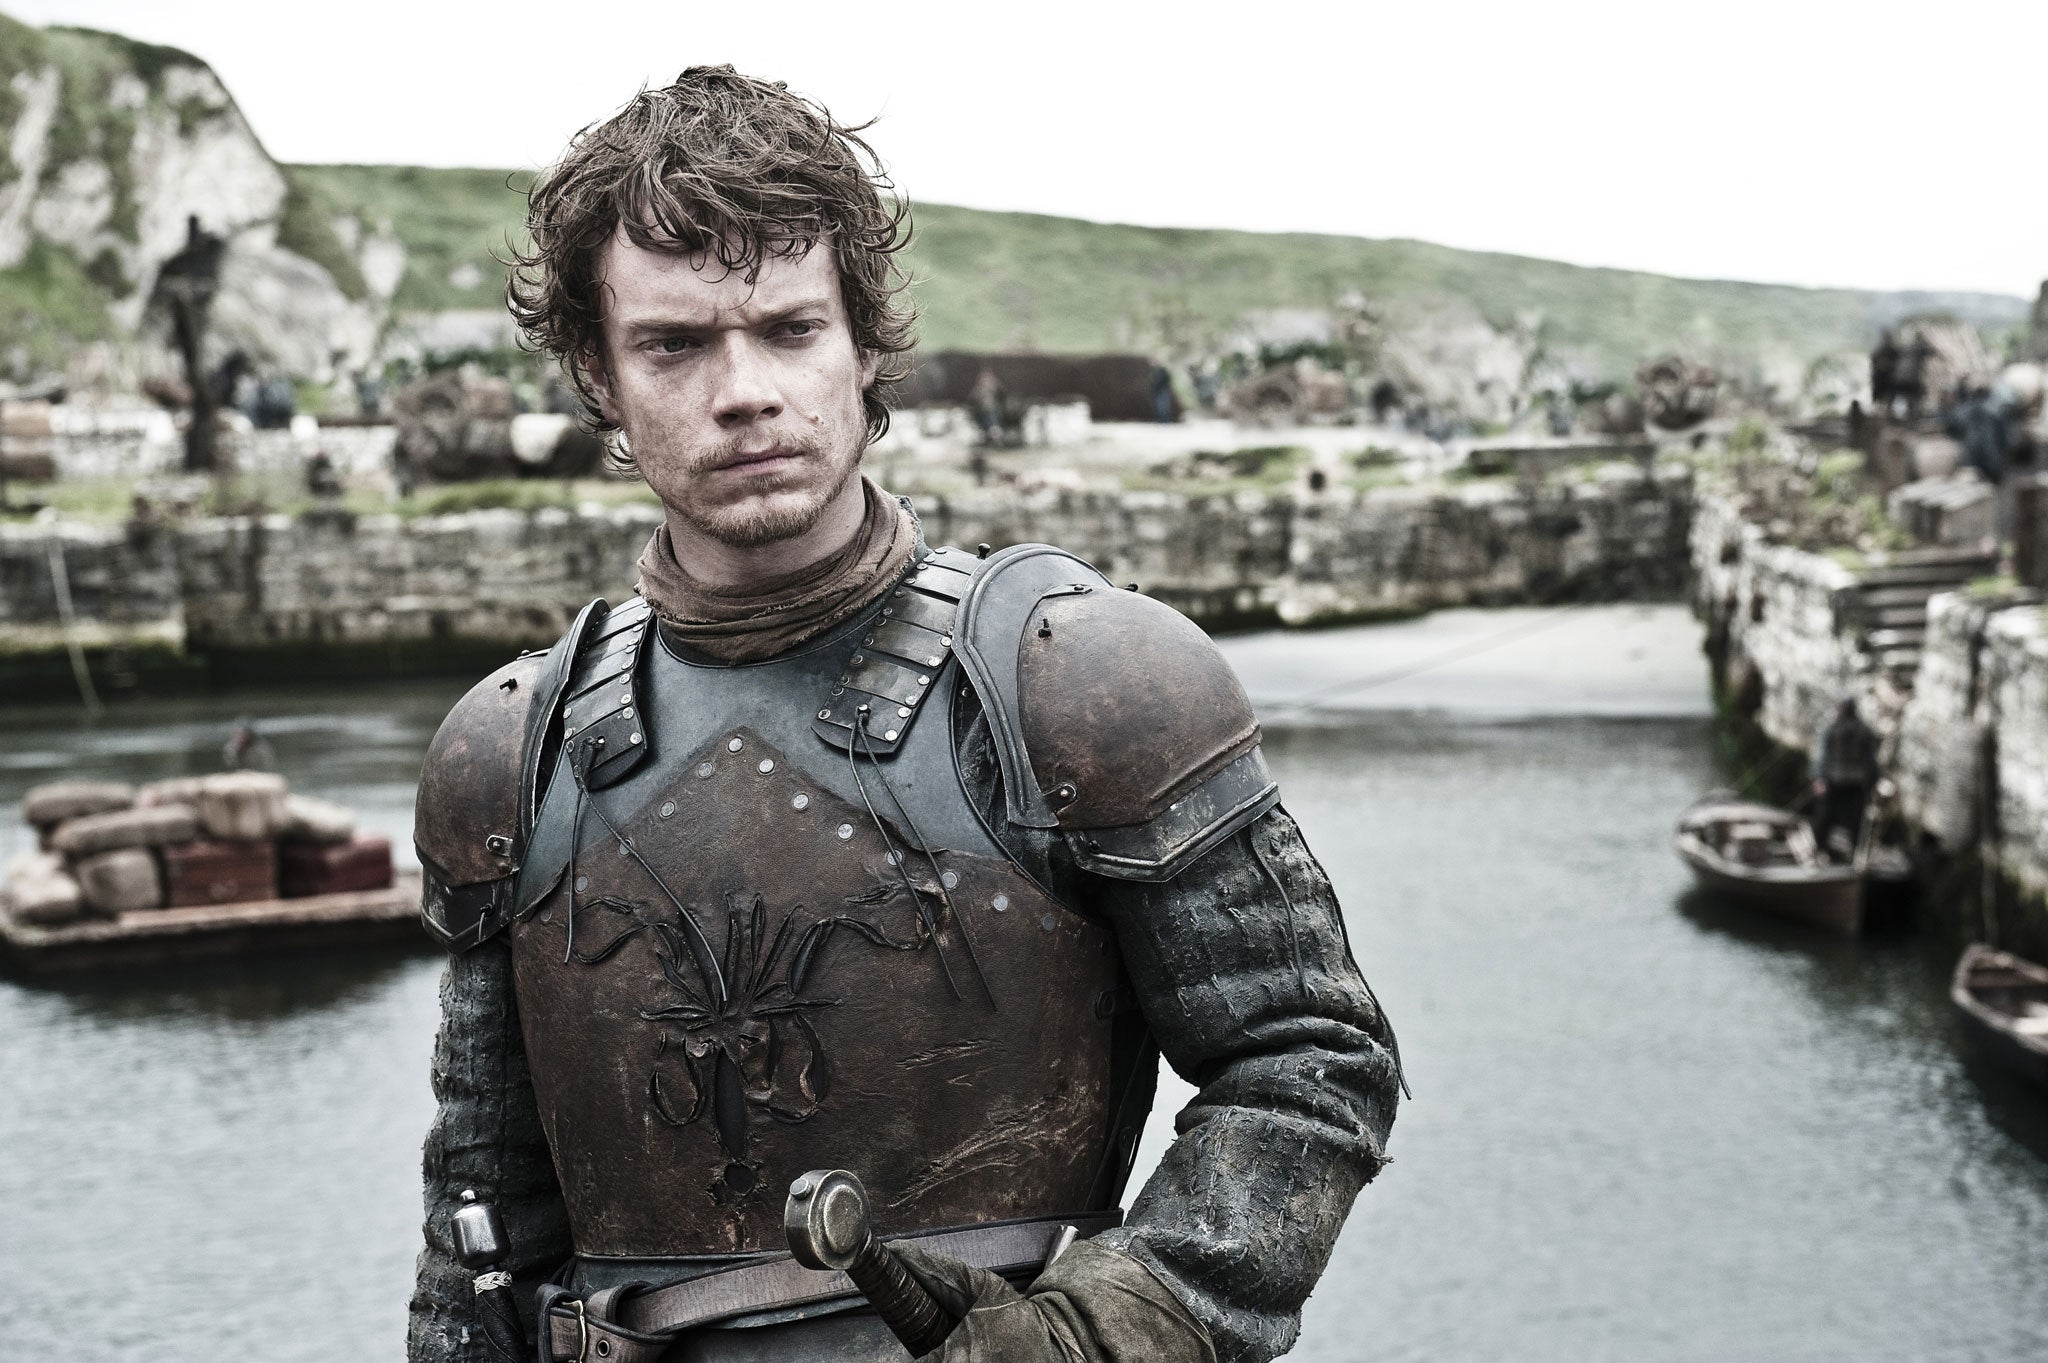 Parents appear to be naming their children after Theon Greyjoy and other Game of Thrones characters